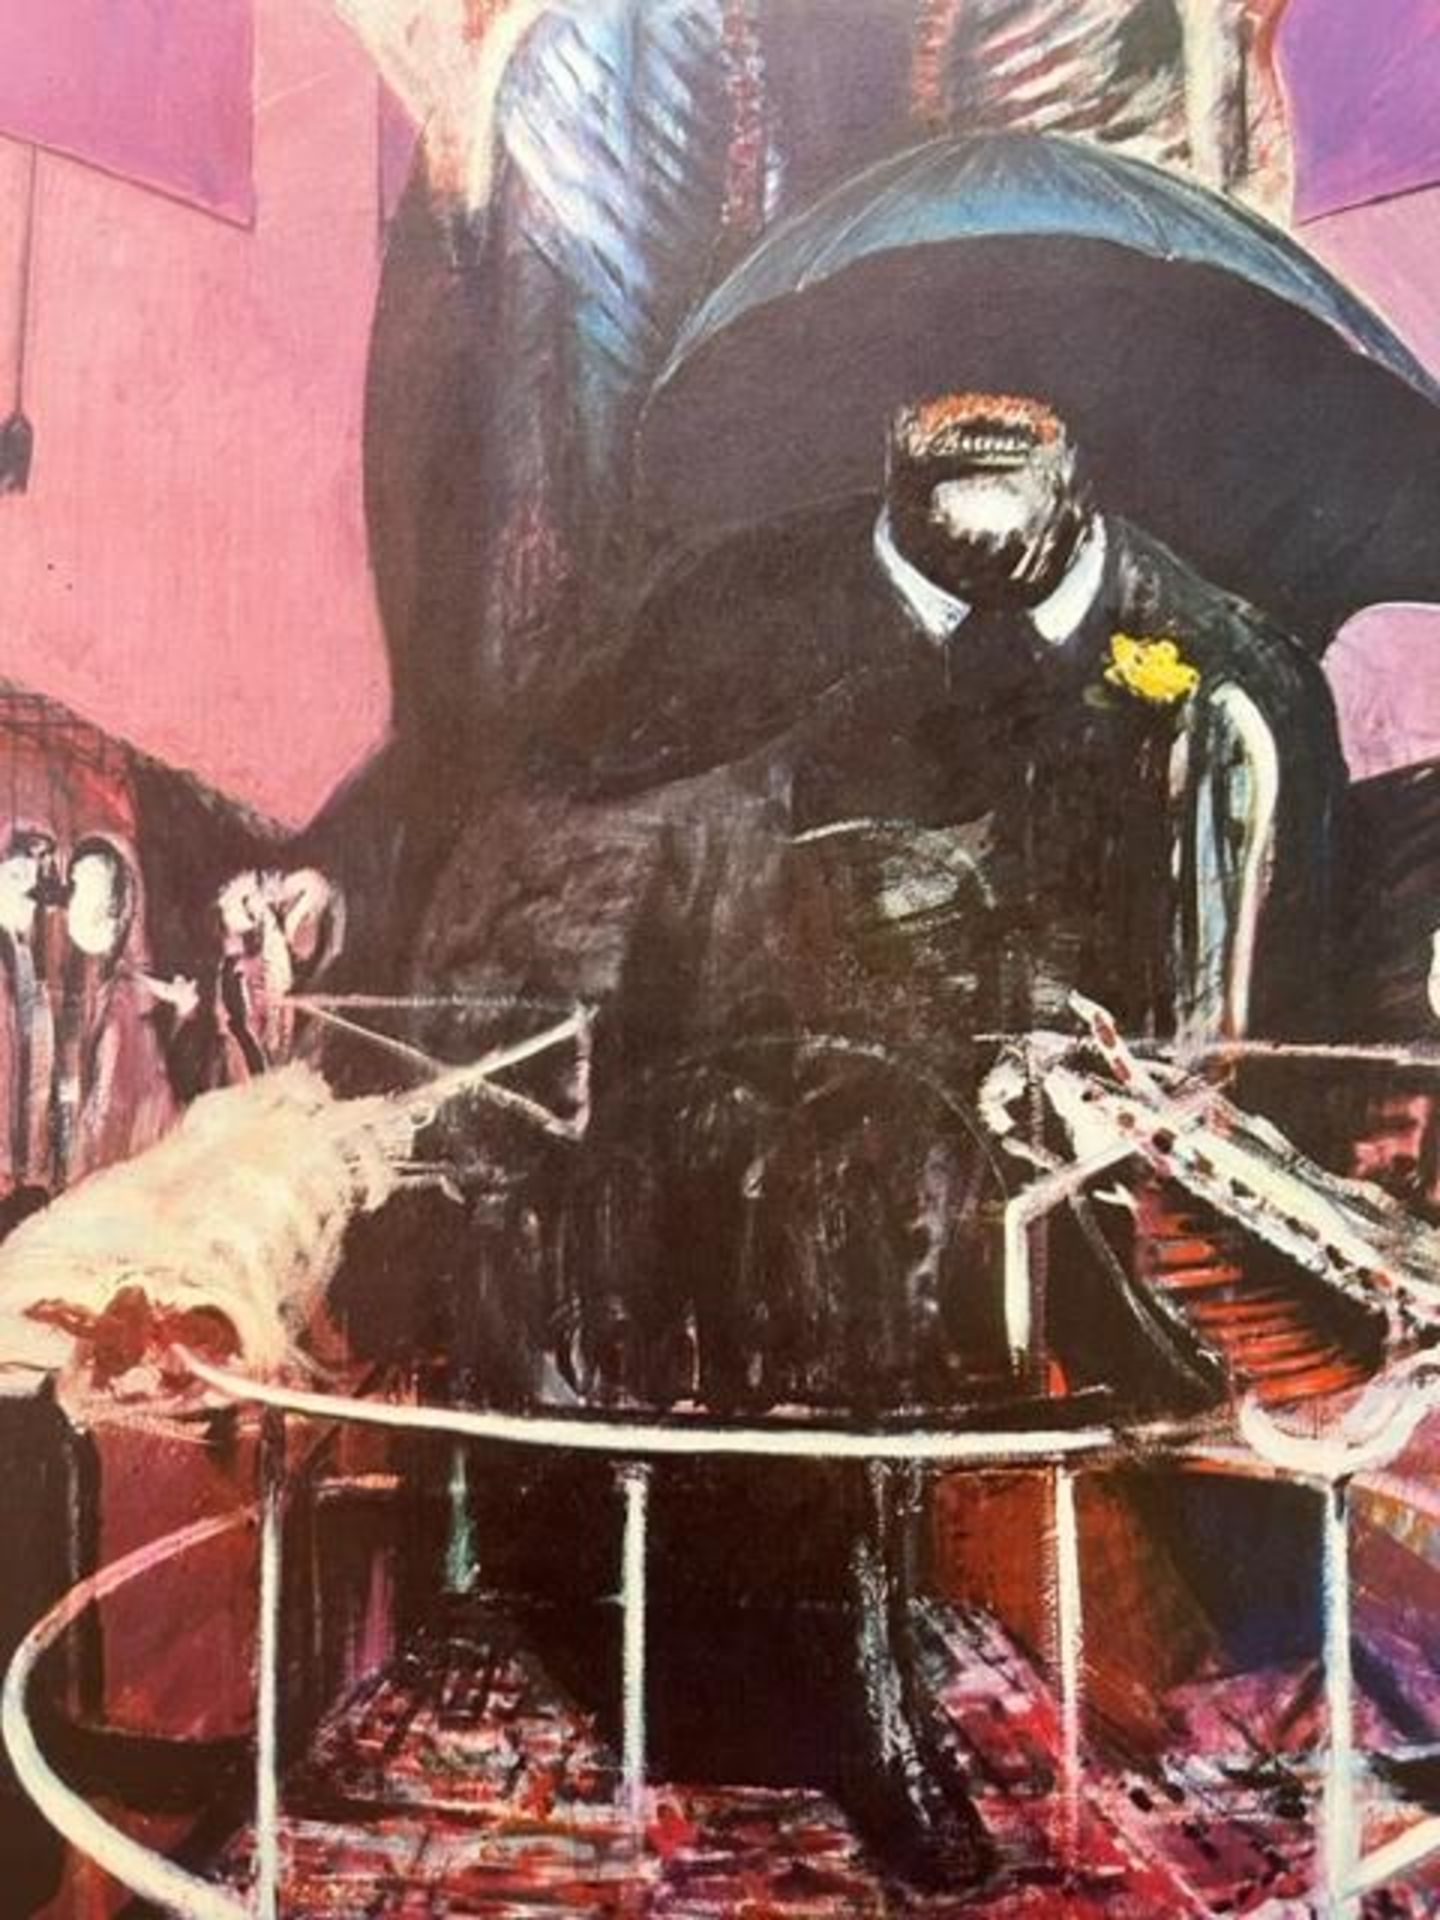 Francis Bacon "Painting" Print. - Image 7 of 12